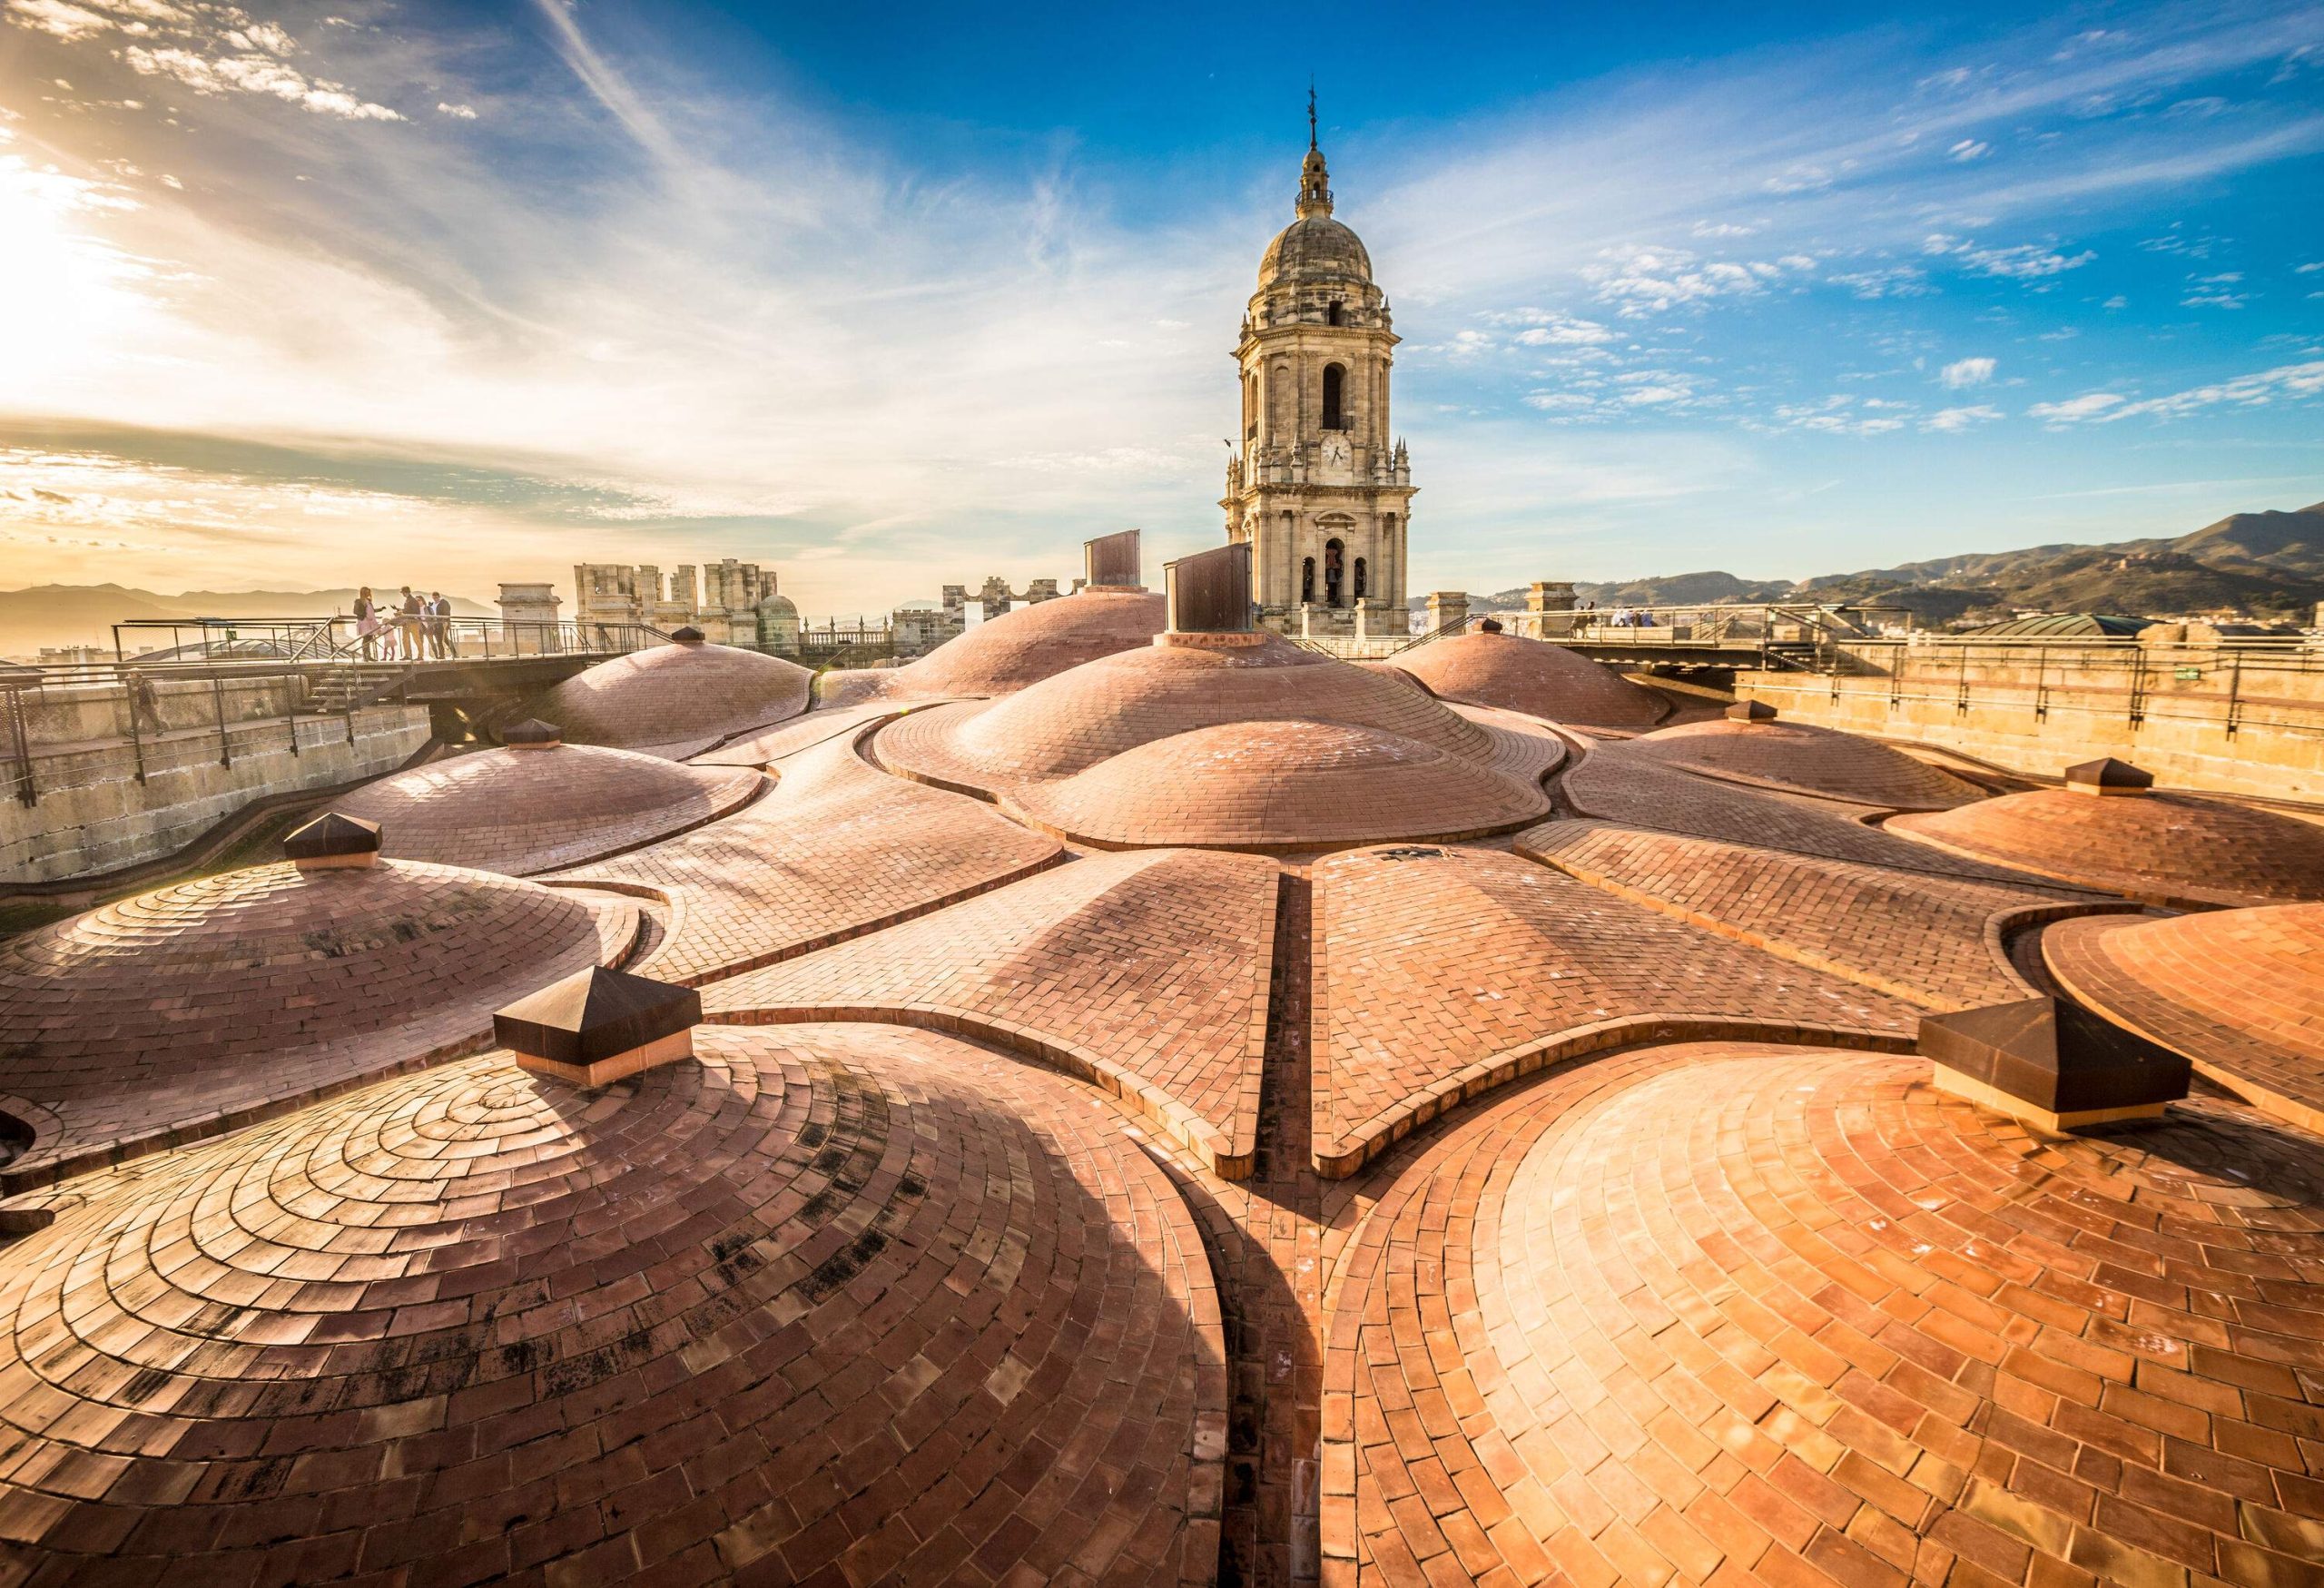 A unique spectacular sunlit church's rooftop made of multiple small hemispherical roofs with its protruding bell tower. 